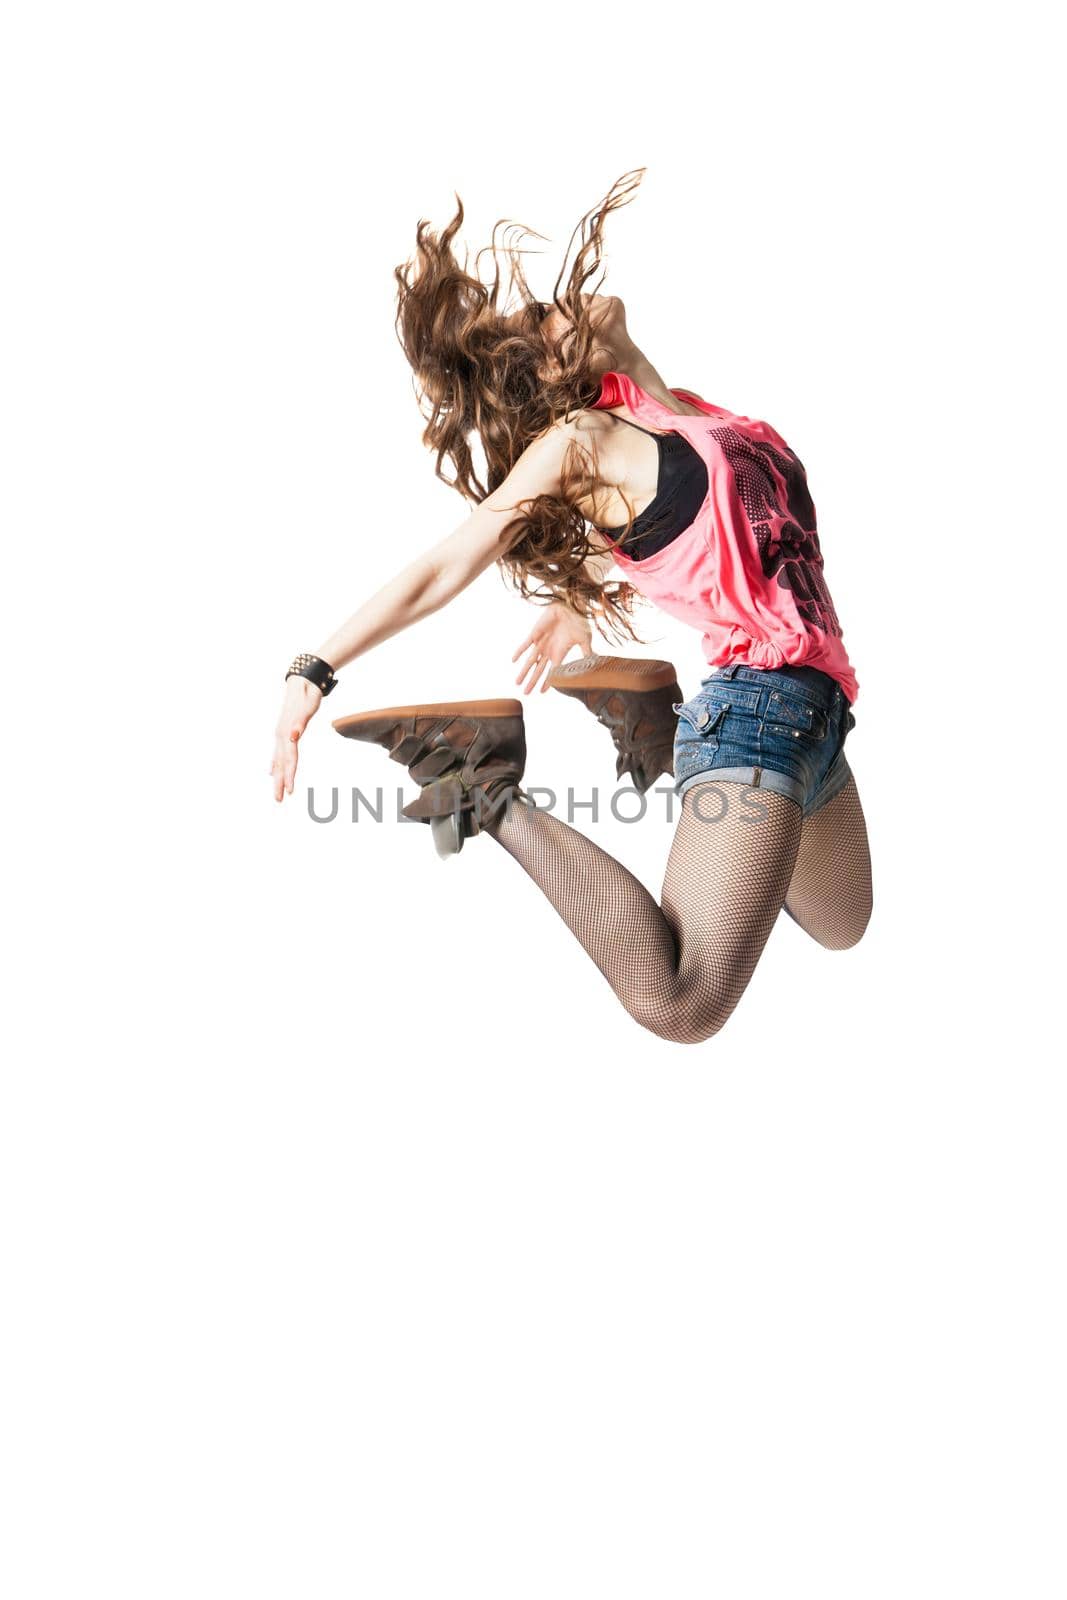 cool looking two dancing woman on white background by Julenochek